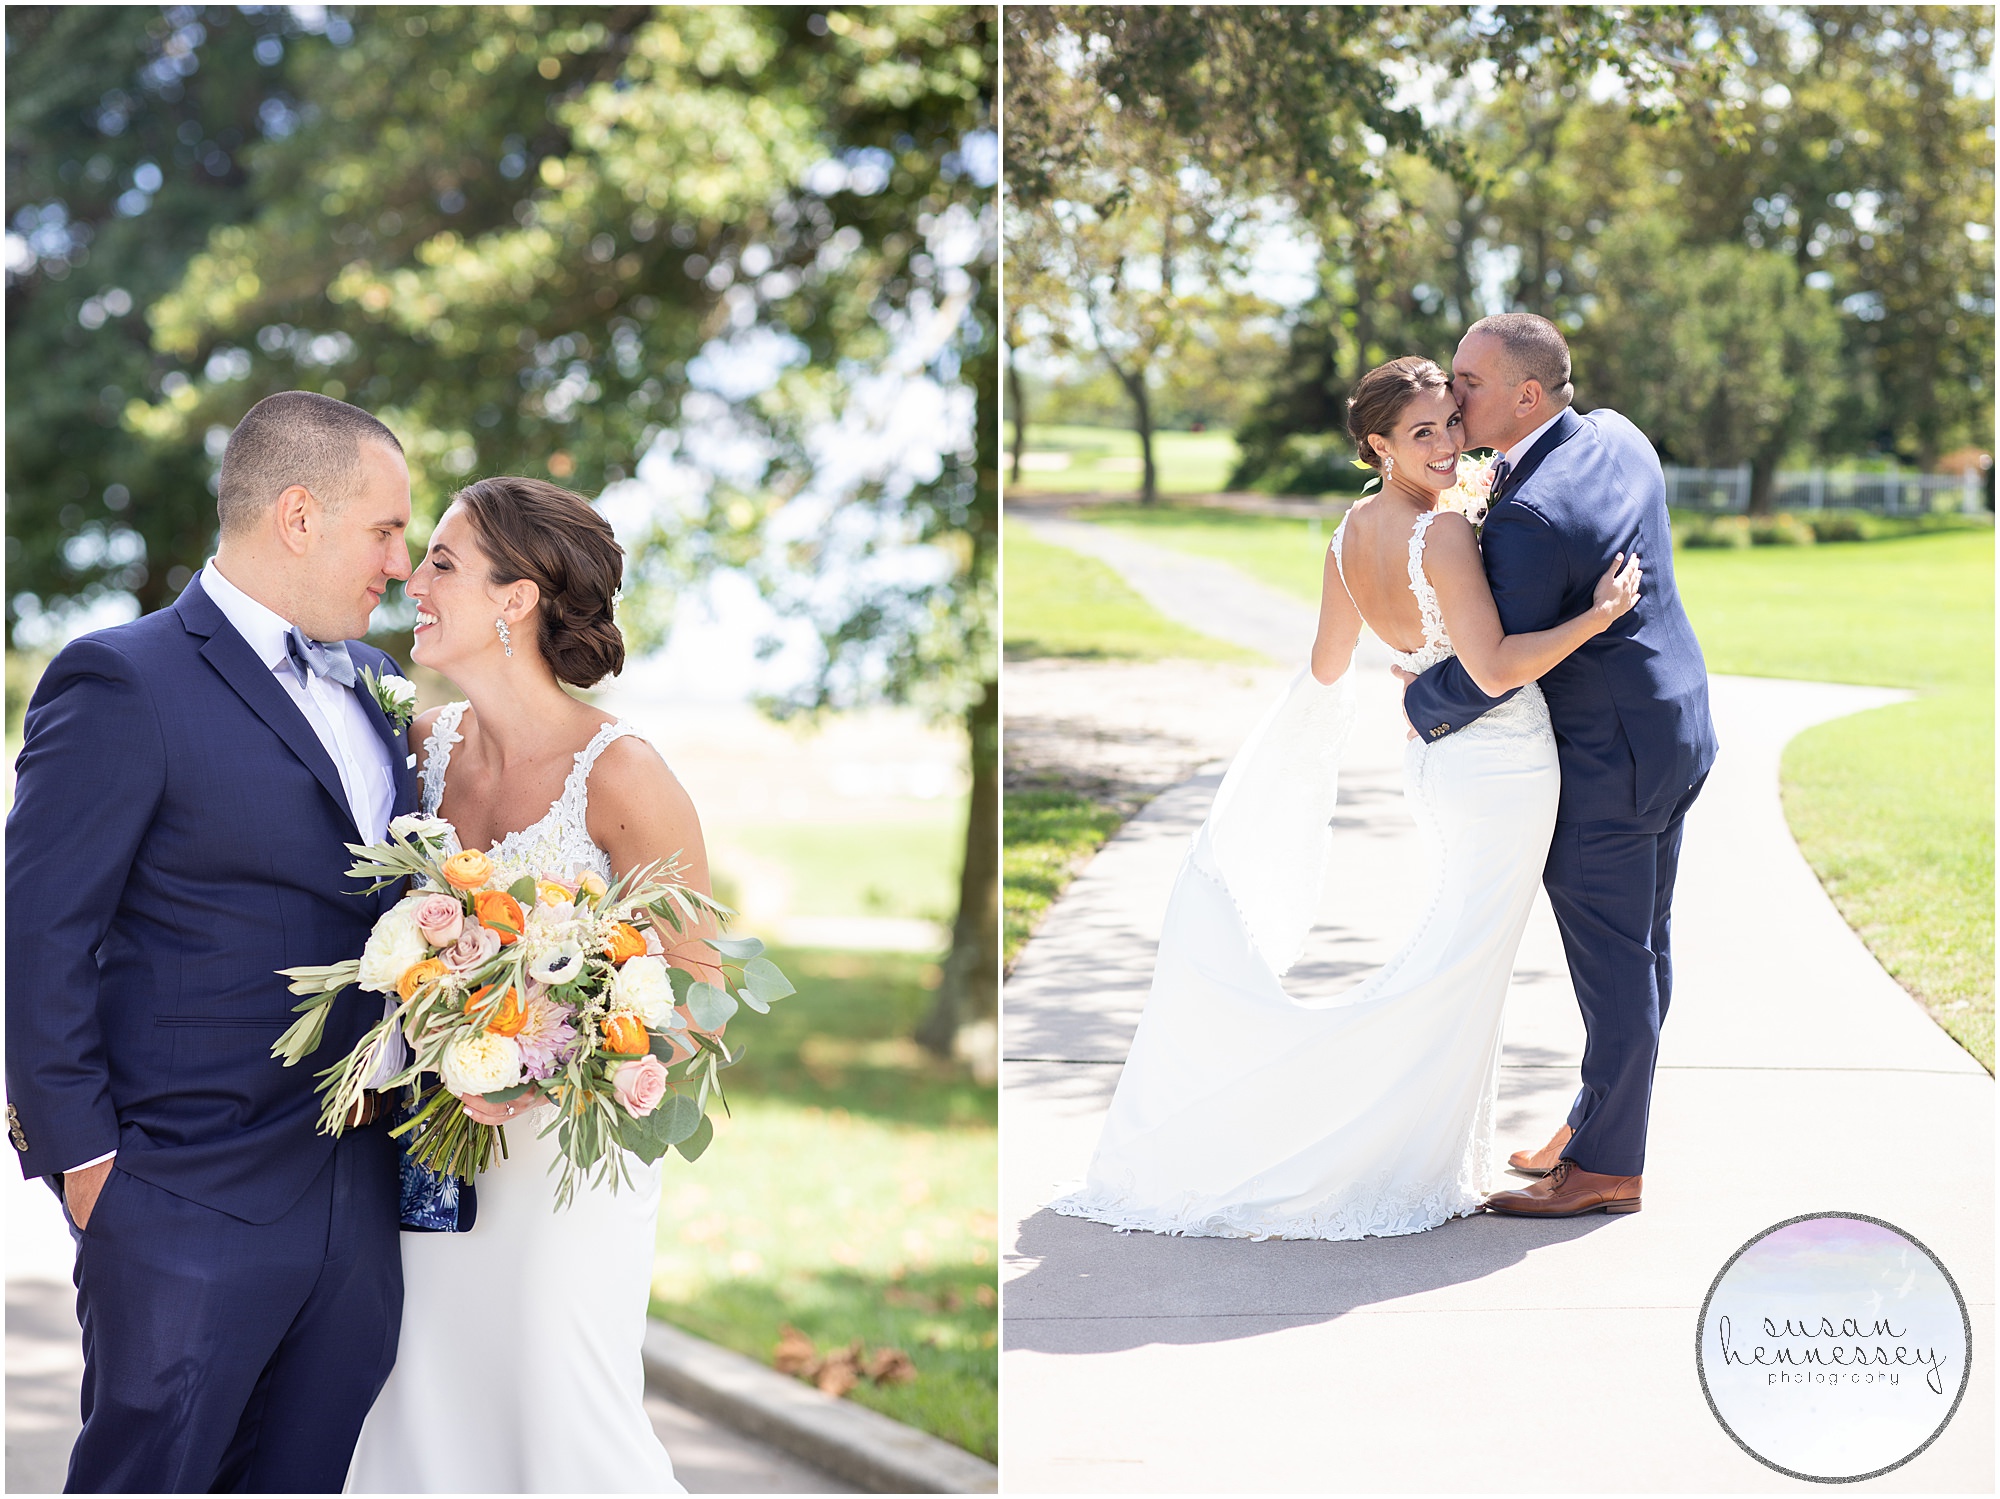 Susan Hennessey Photography Best of 2020 Weddings - Bride and groom portraits at Atlantic City Country Club wedding